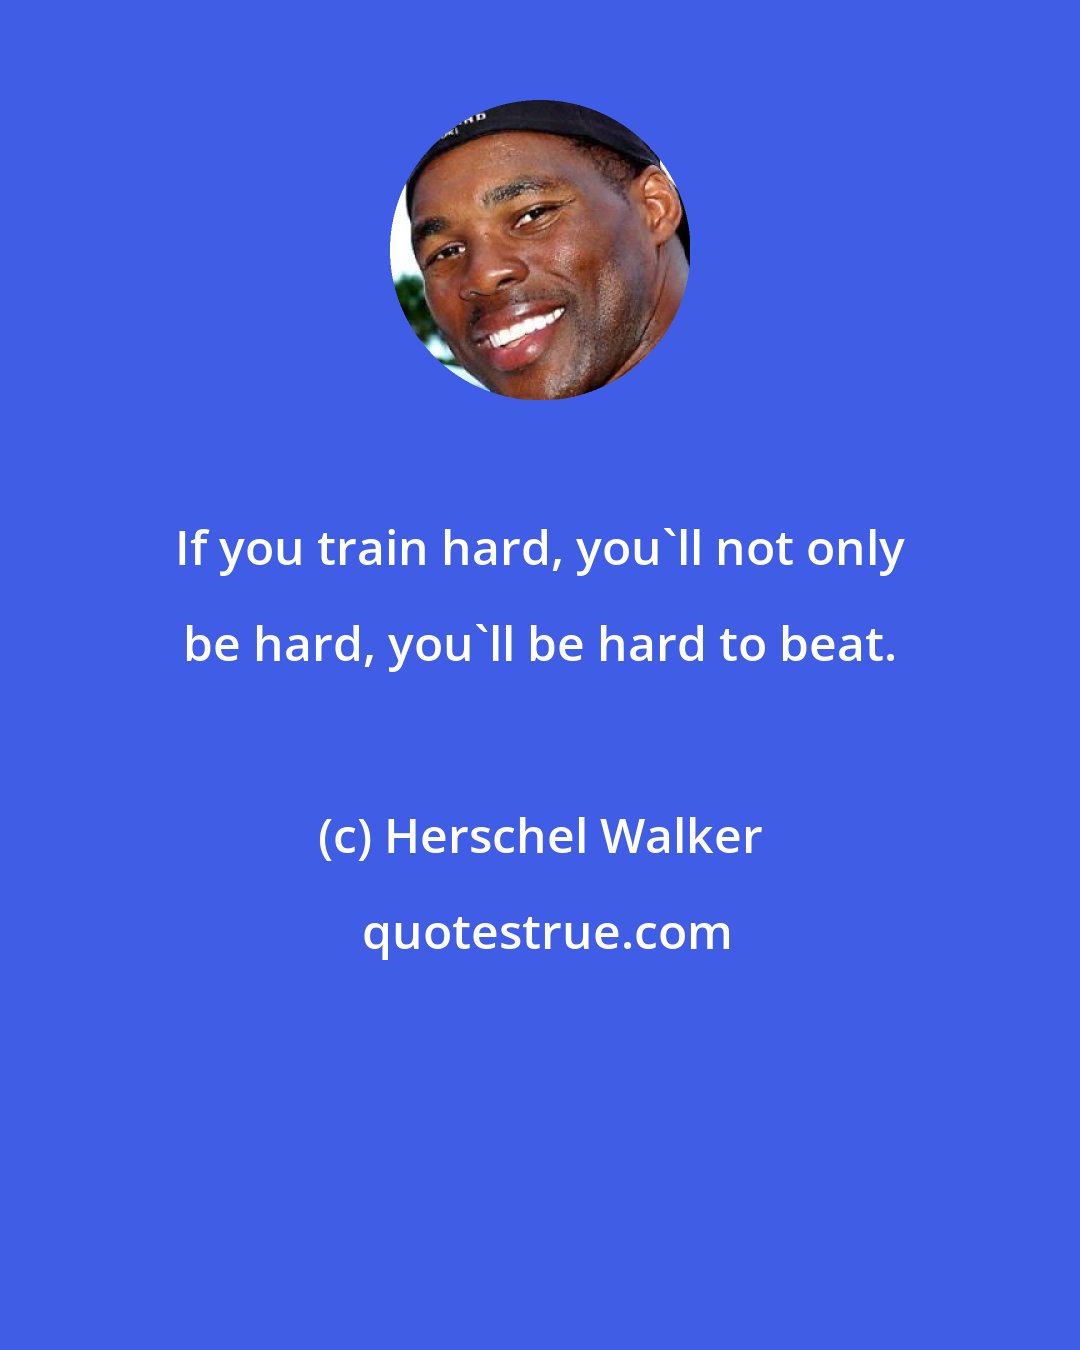 Herschel Walker: If you train hard, you'll not only be hard, you'll be hard to beat.